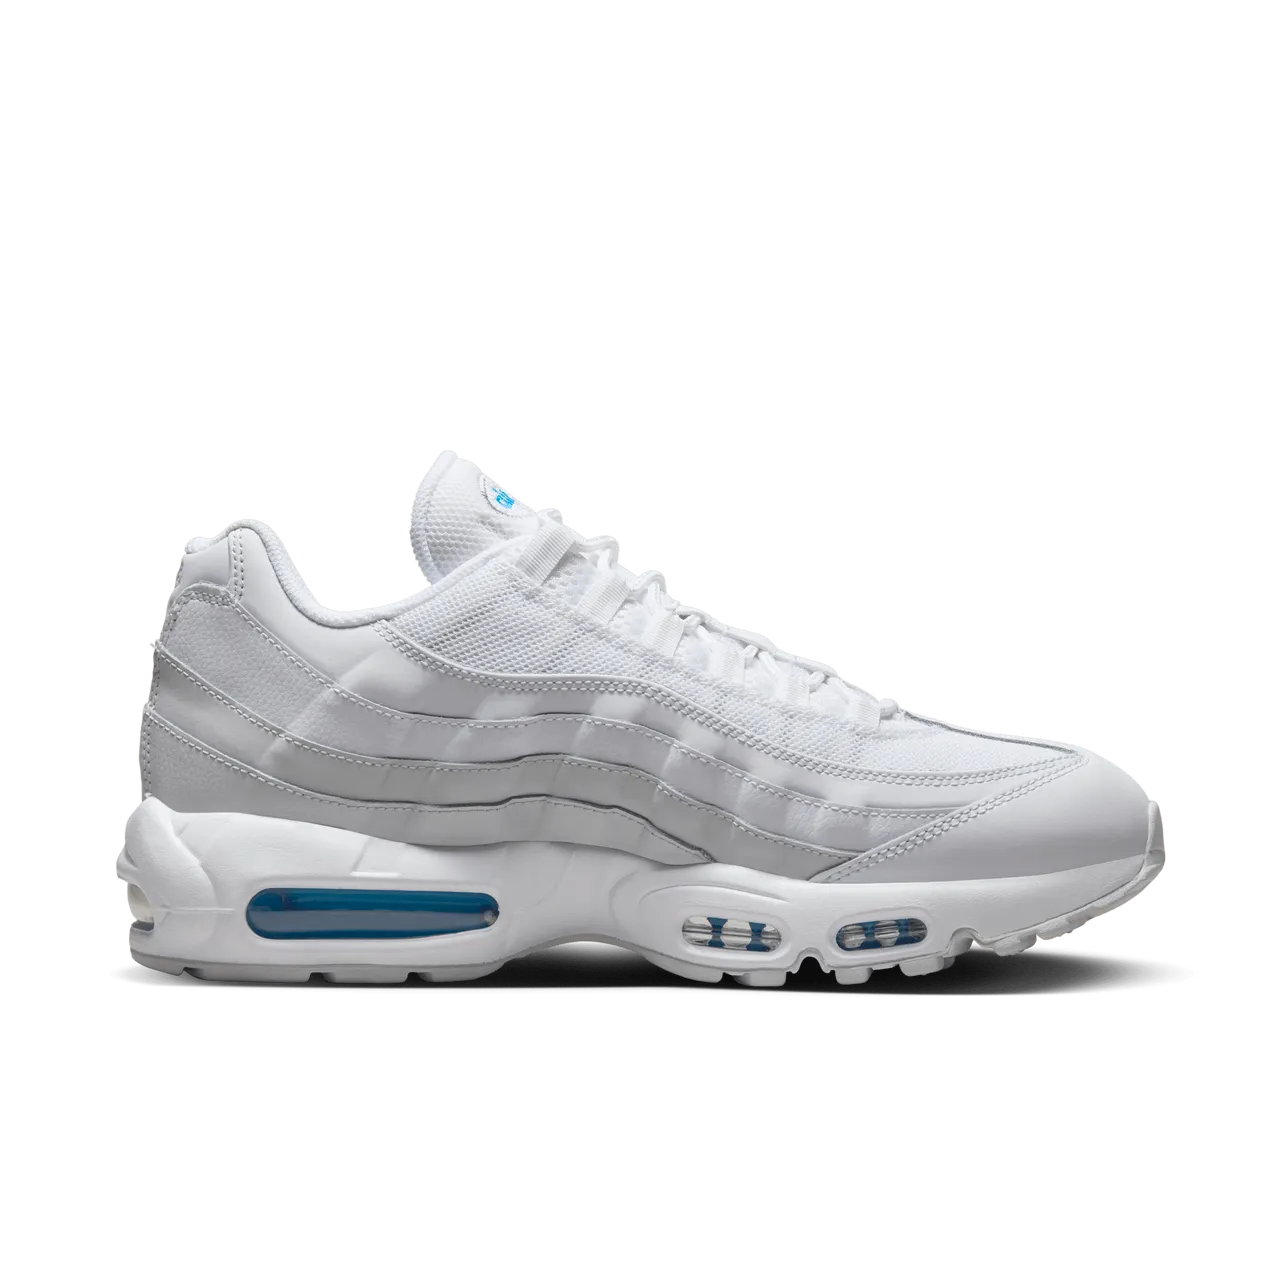 Nike Air Max 95 Men's Shoes - White - Leather